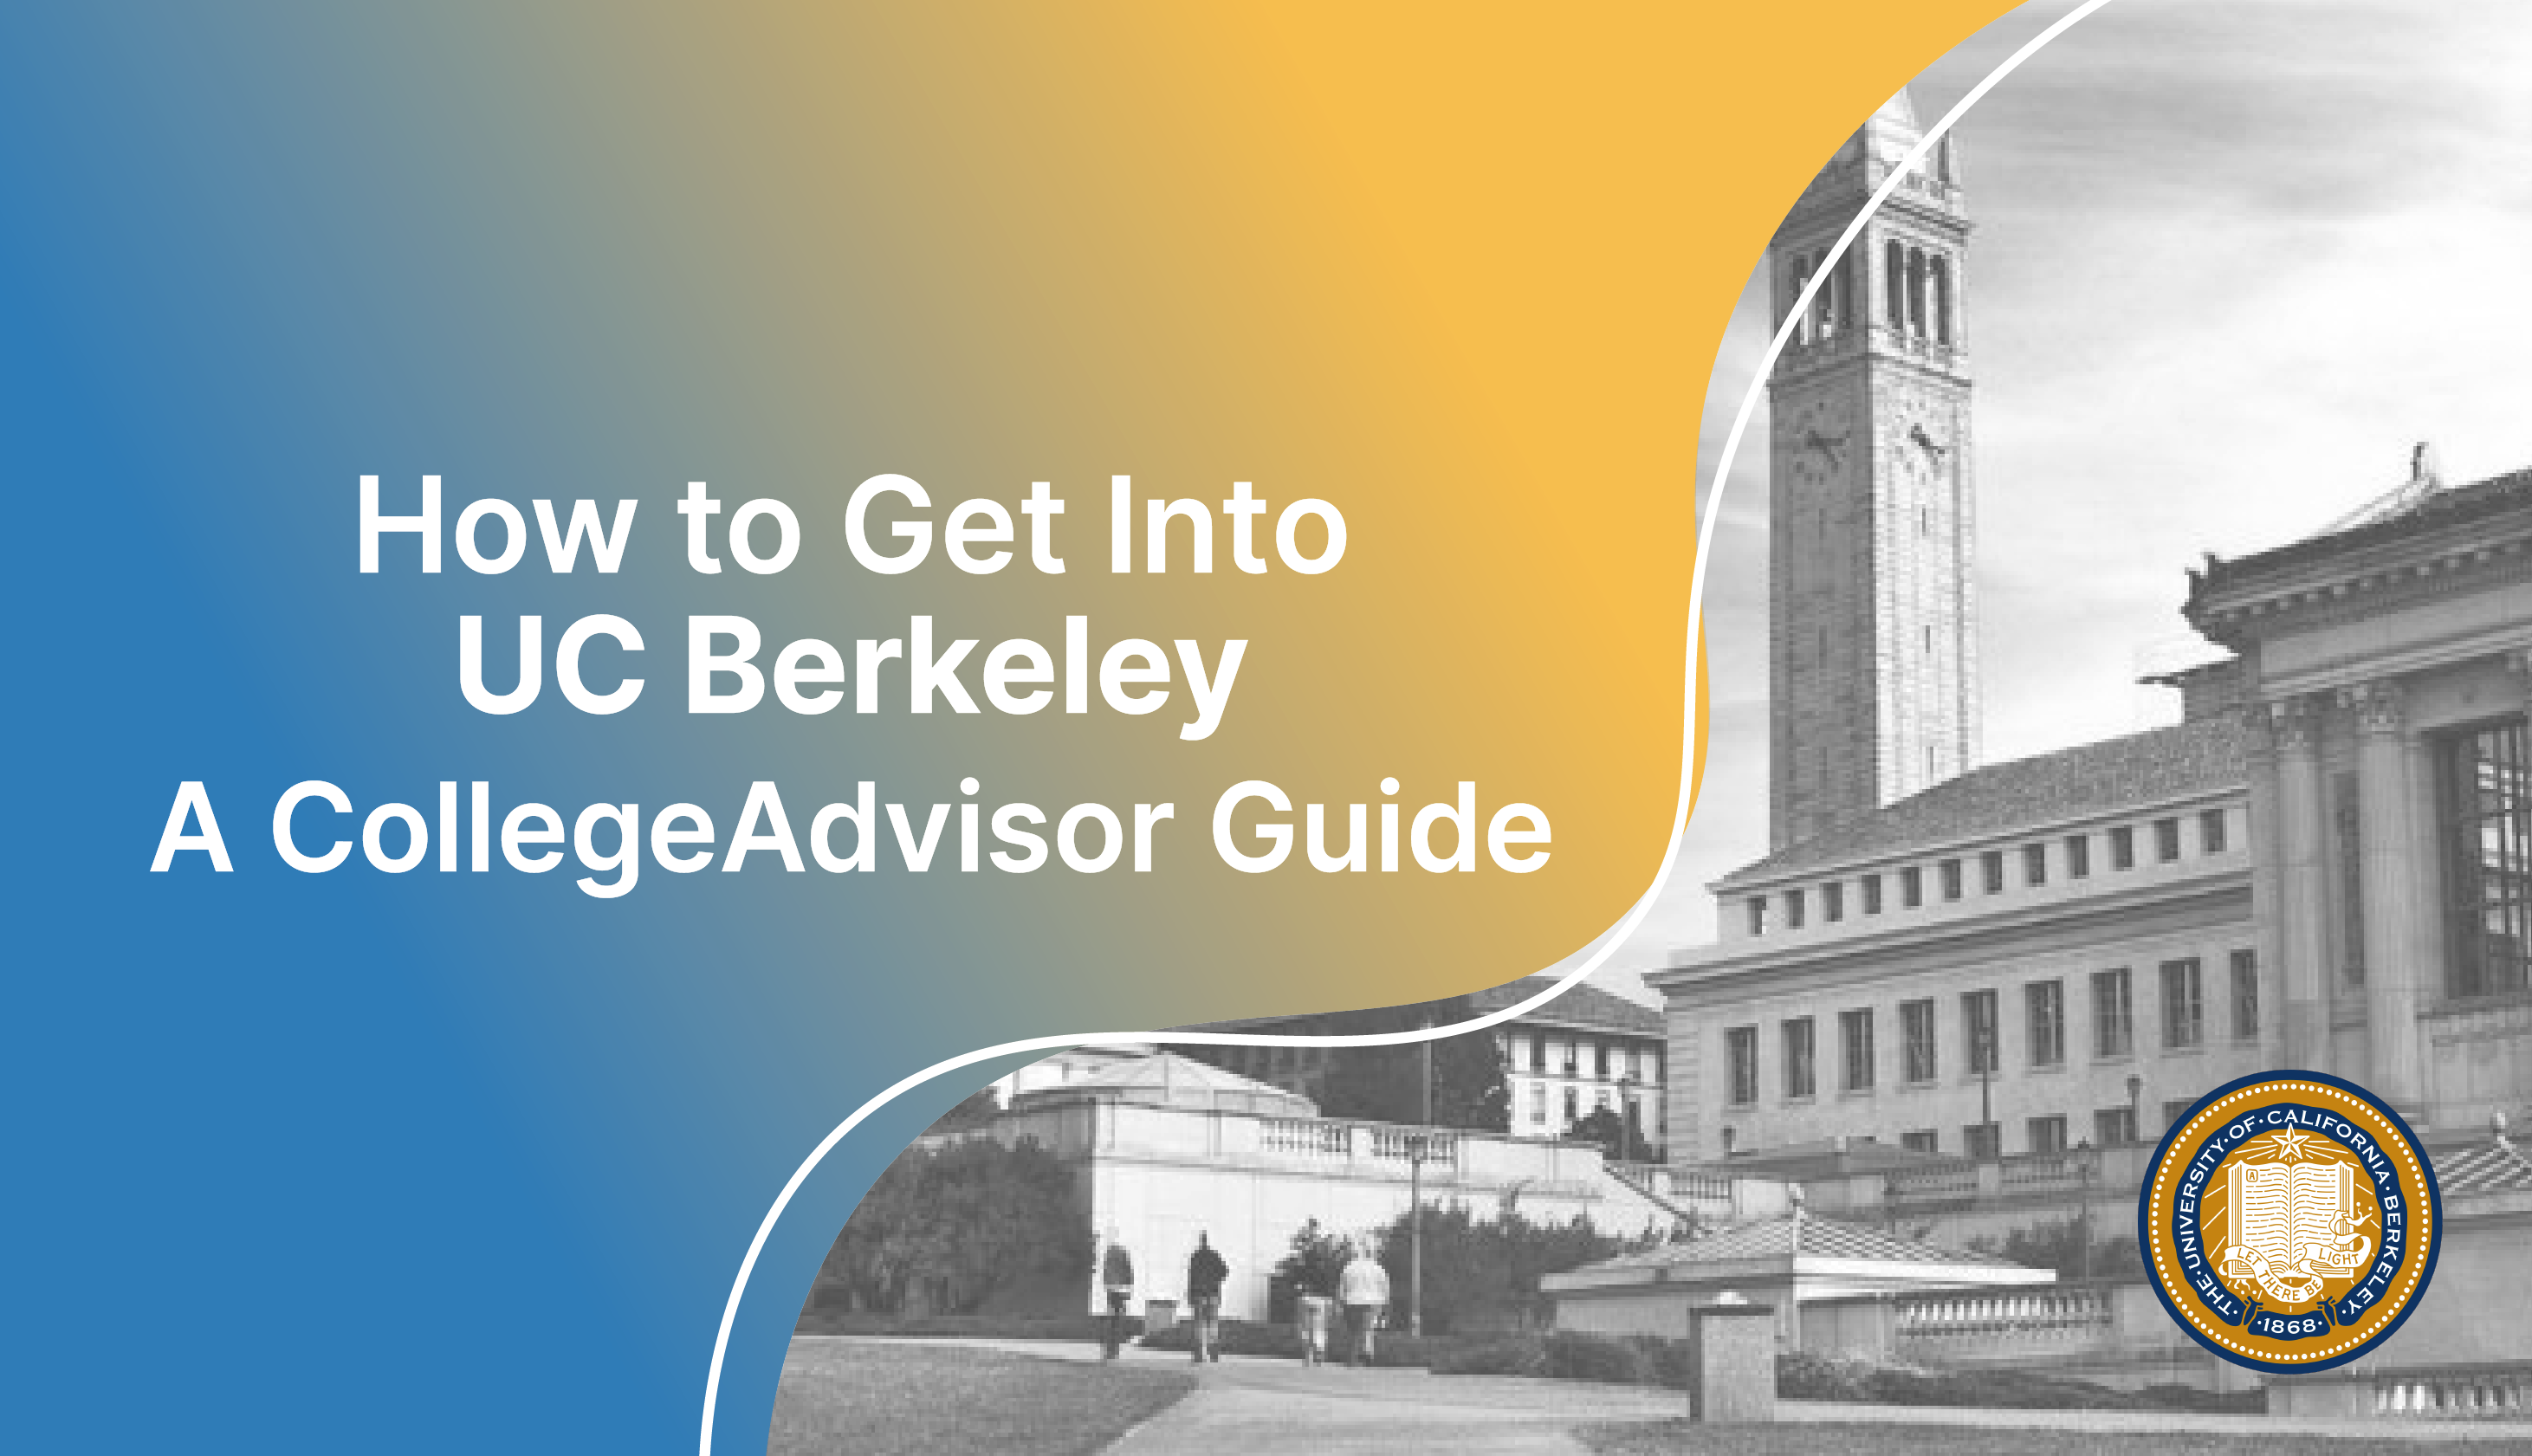 How to Get Into UC Berkeley Guide